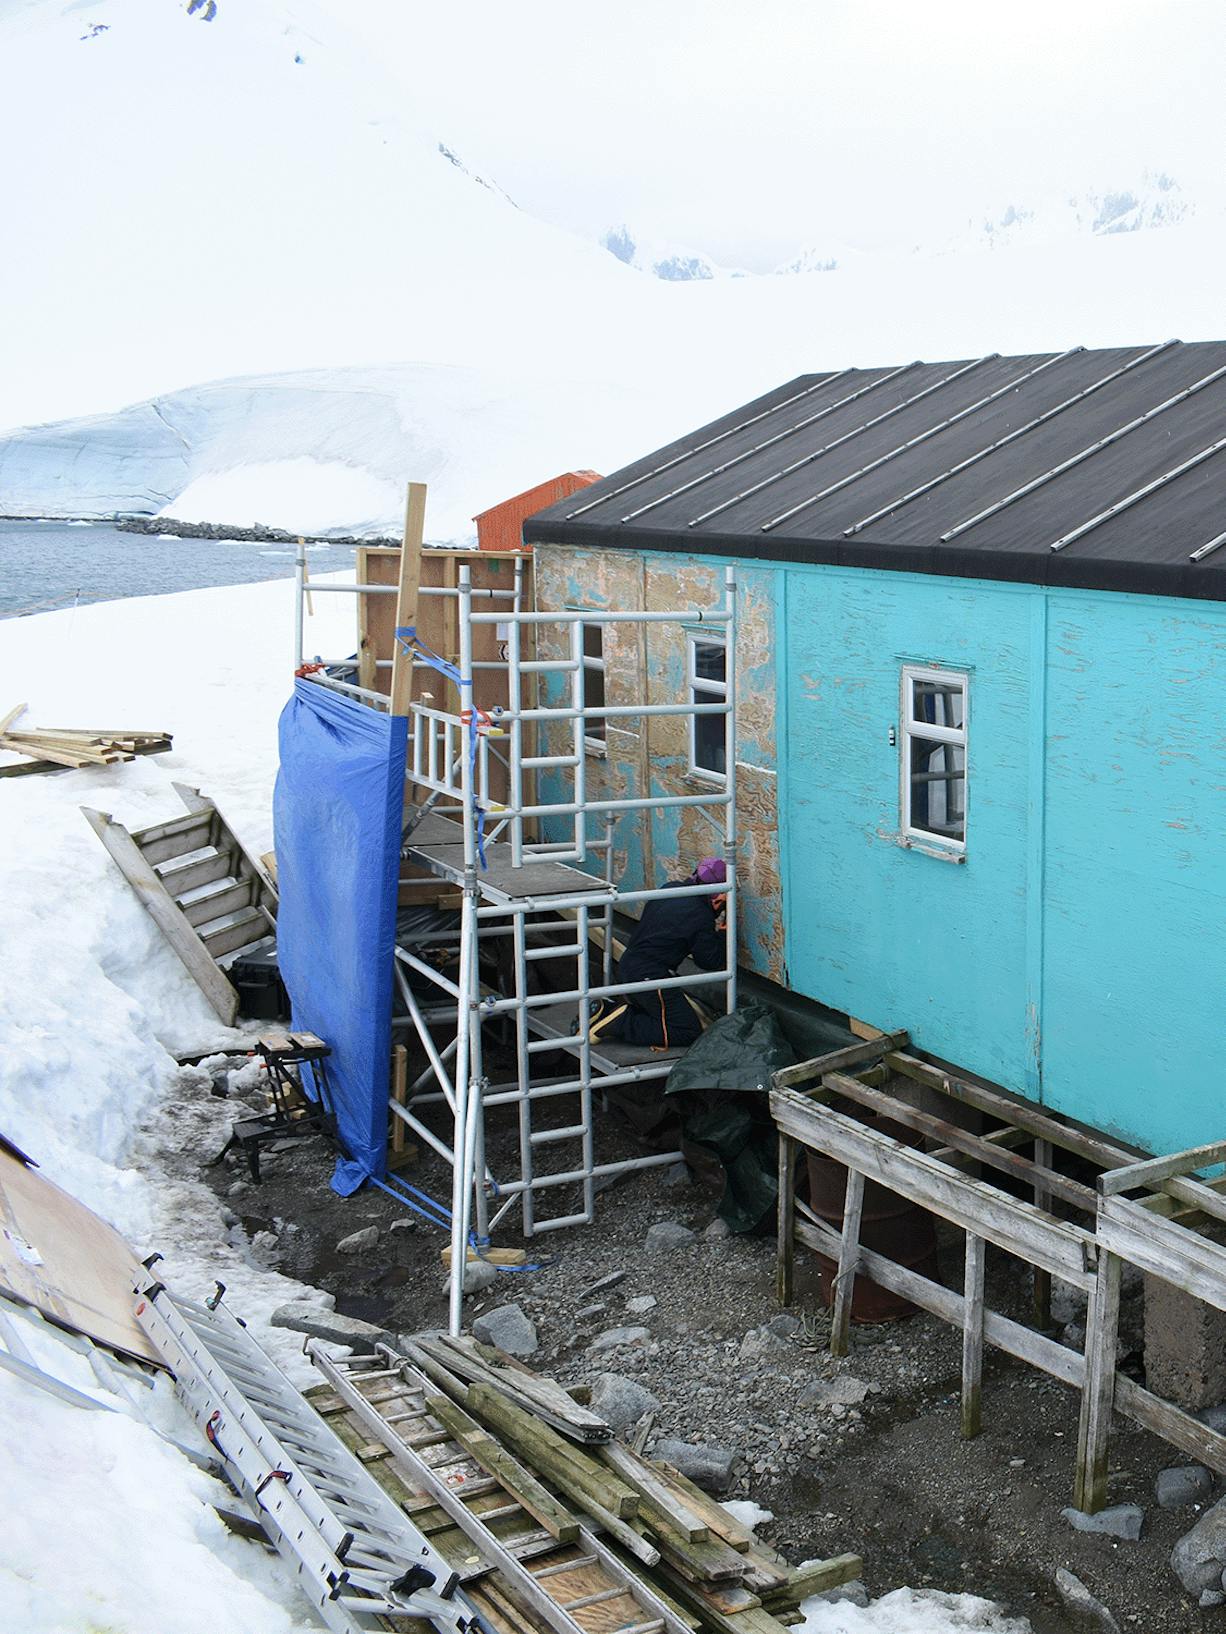 scaffolding on blue wooden hut surrounded by snow